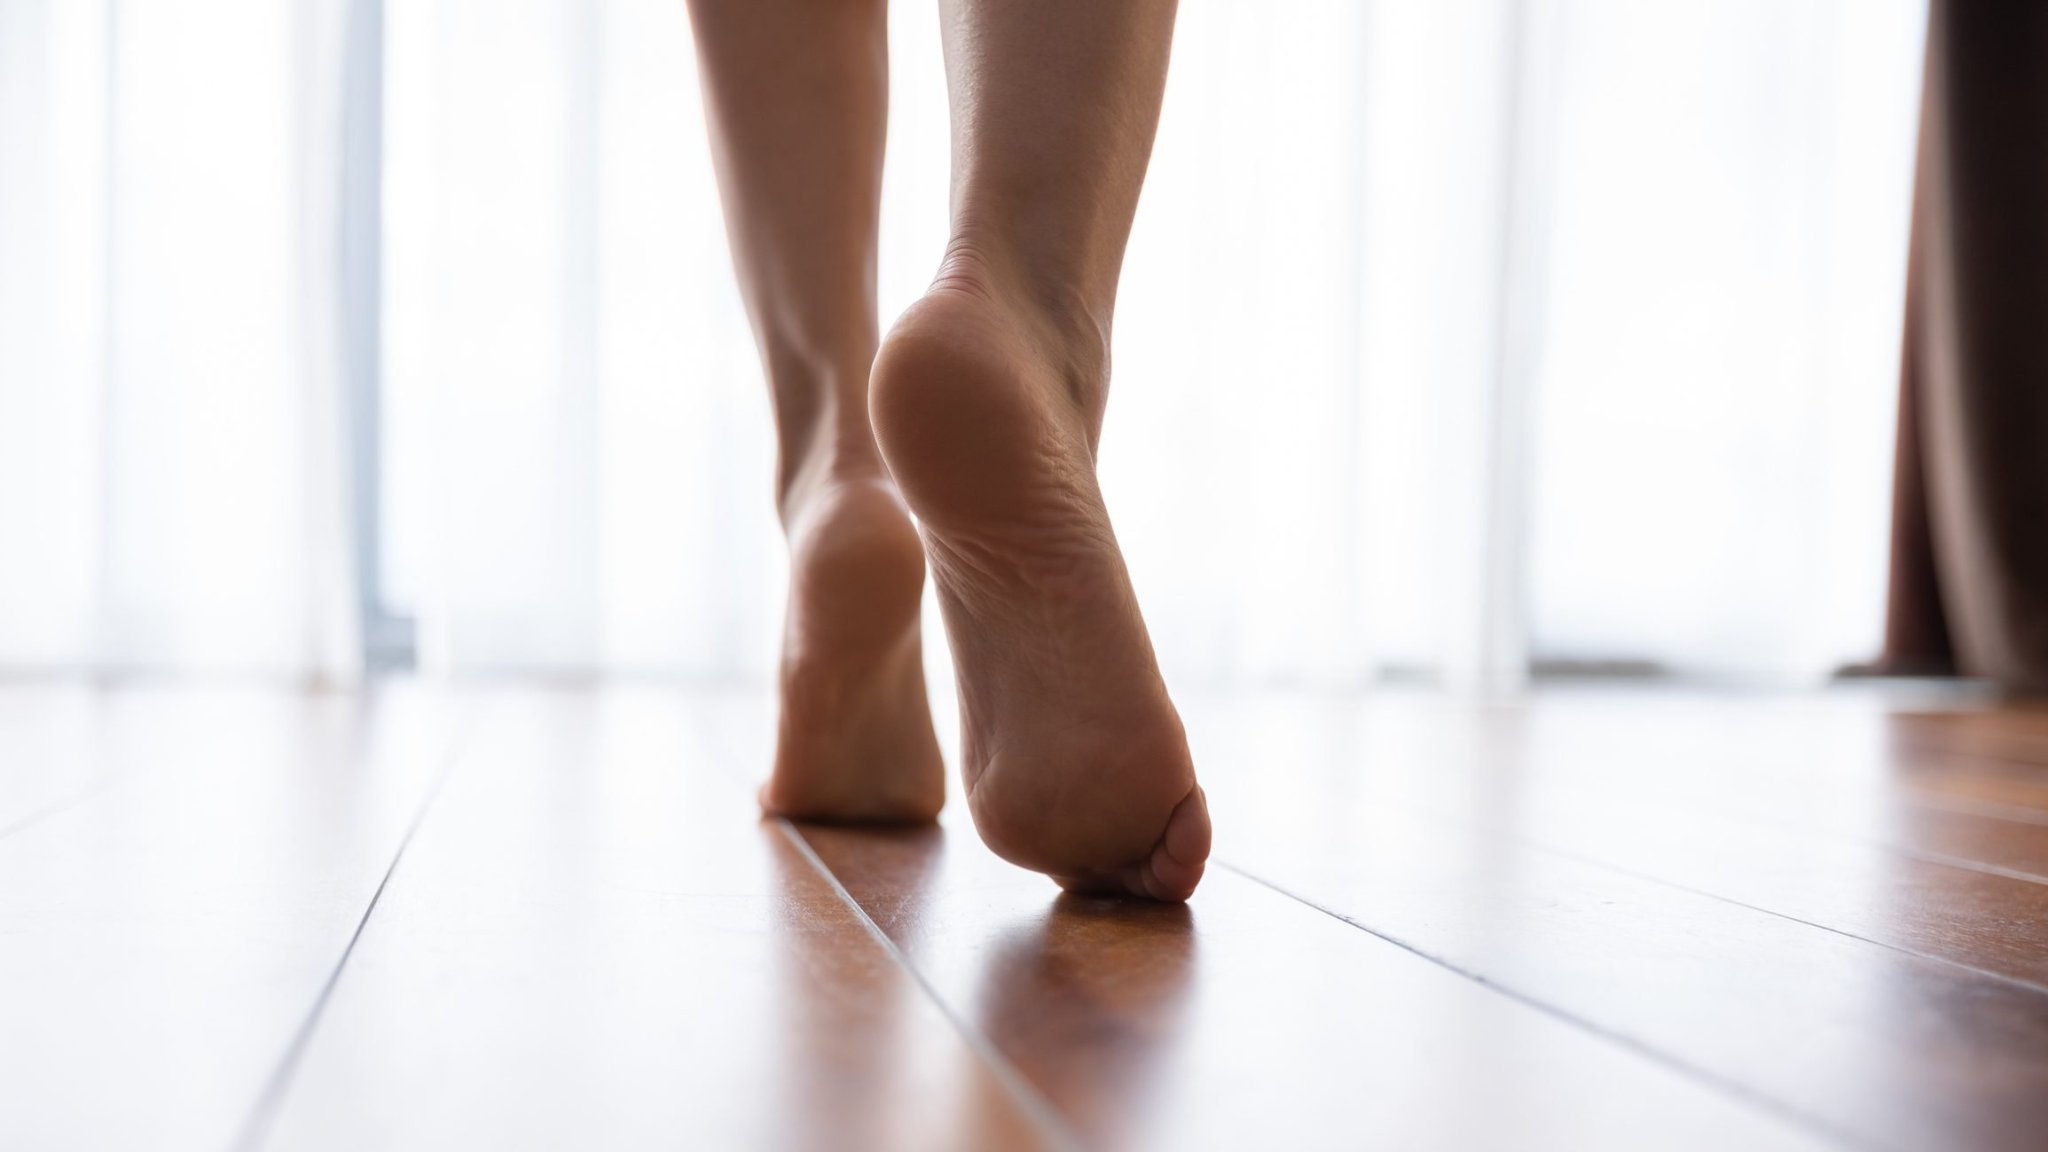 Is Walking Barefoot Bad For Your Feet?